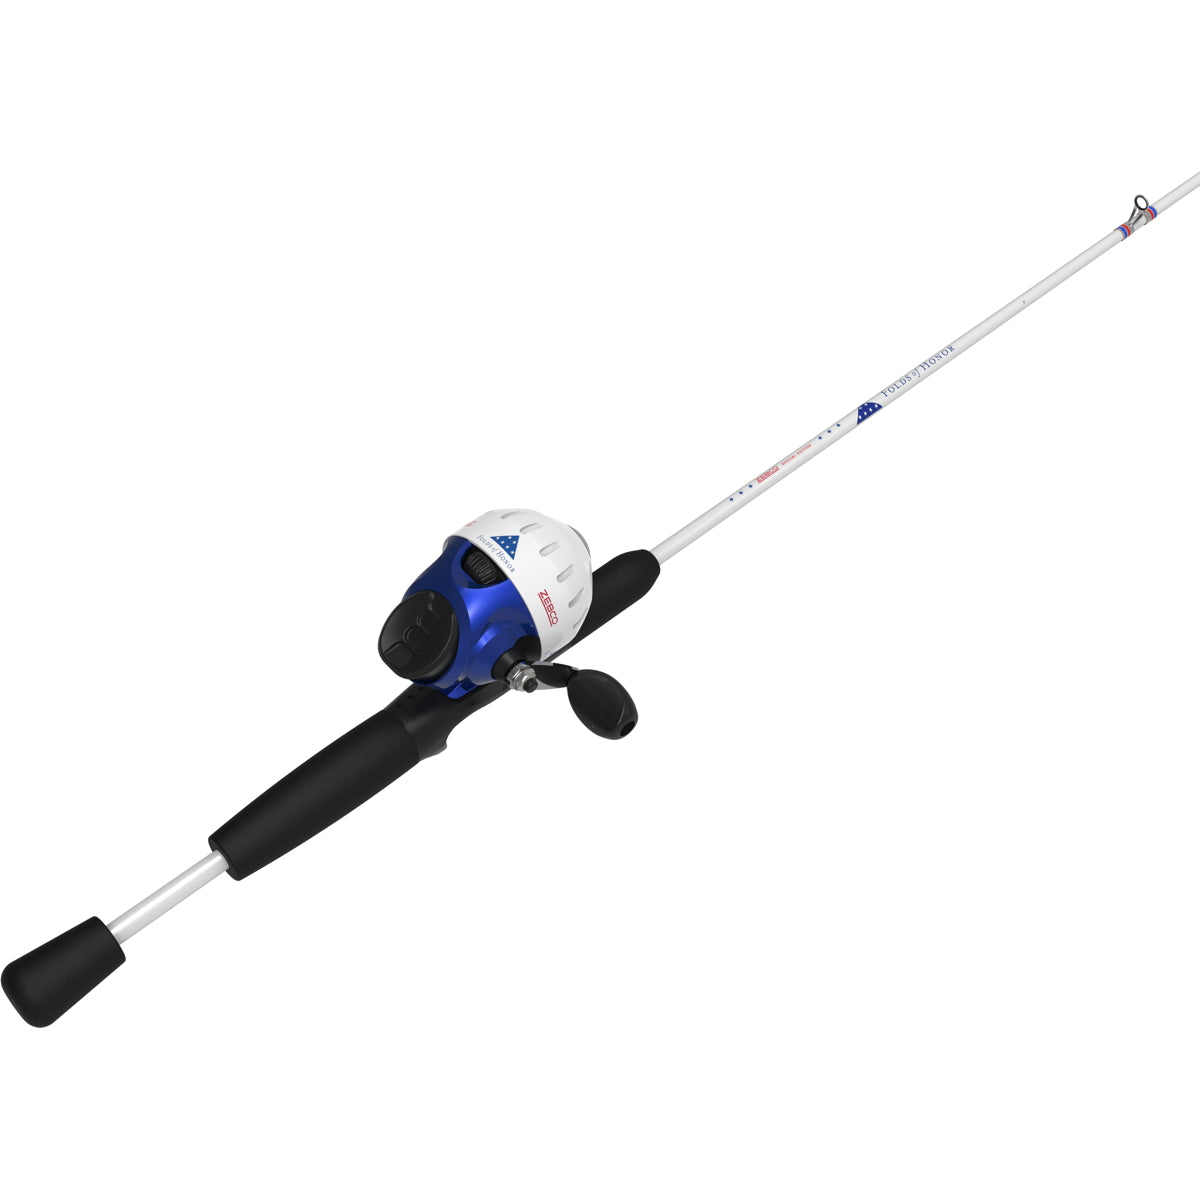 Photo of Zebco Folds of Honor 602M Spincast Combo for sale at United Tackle Shops.